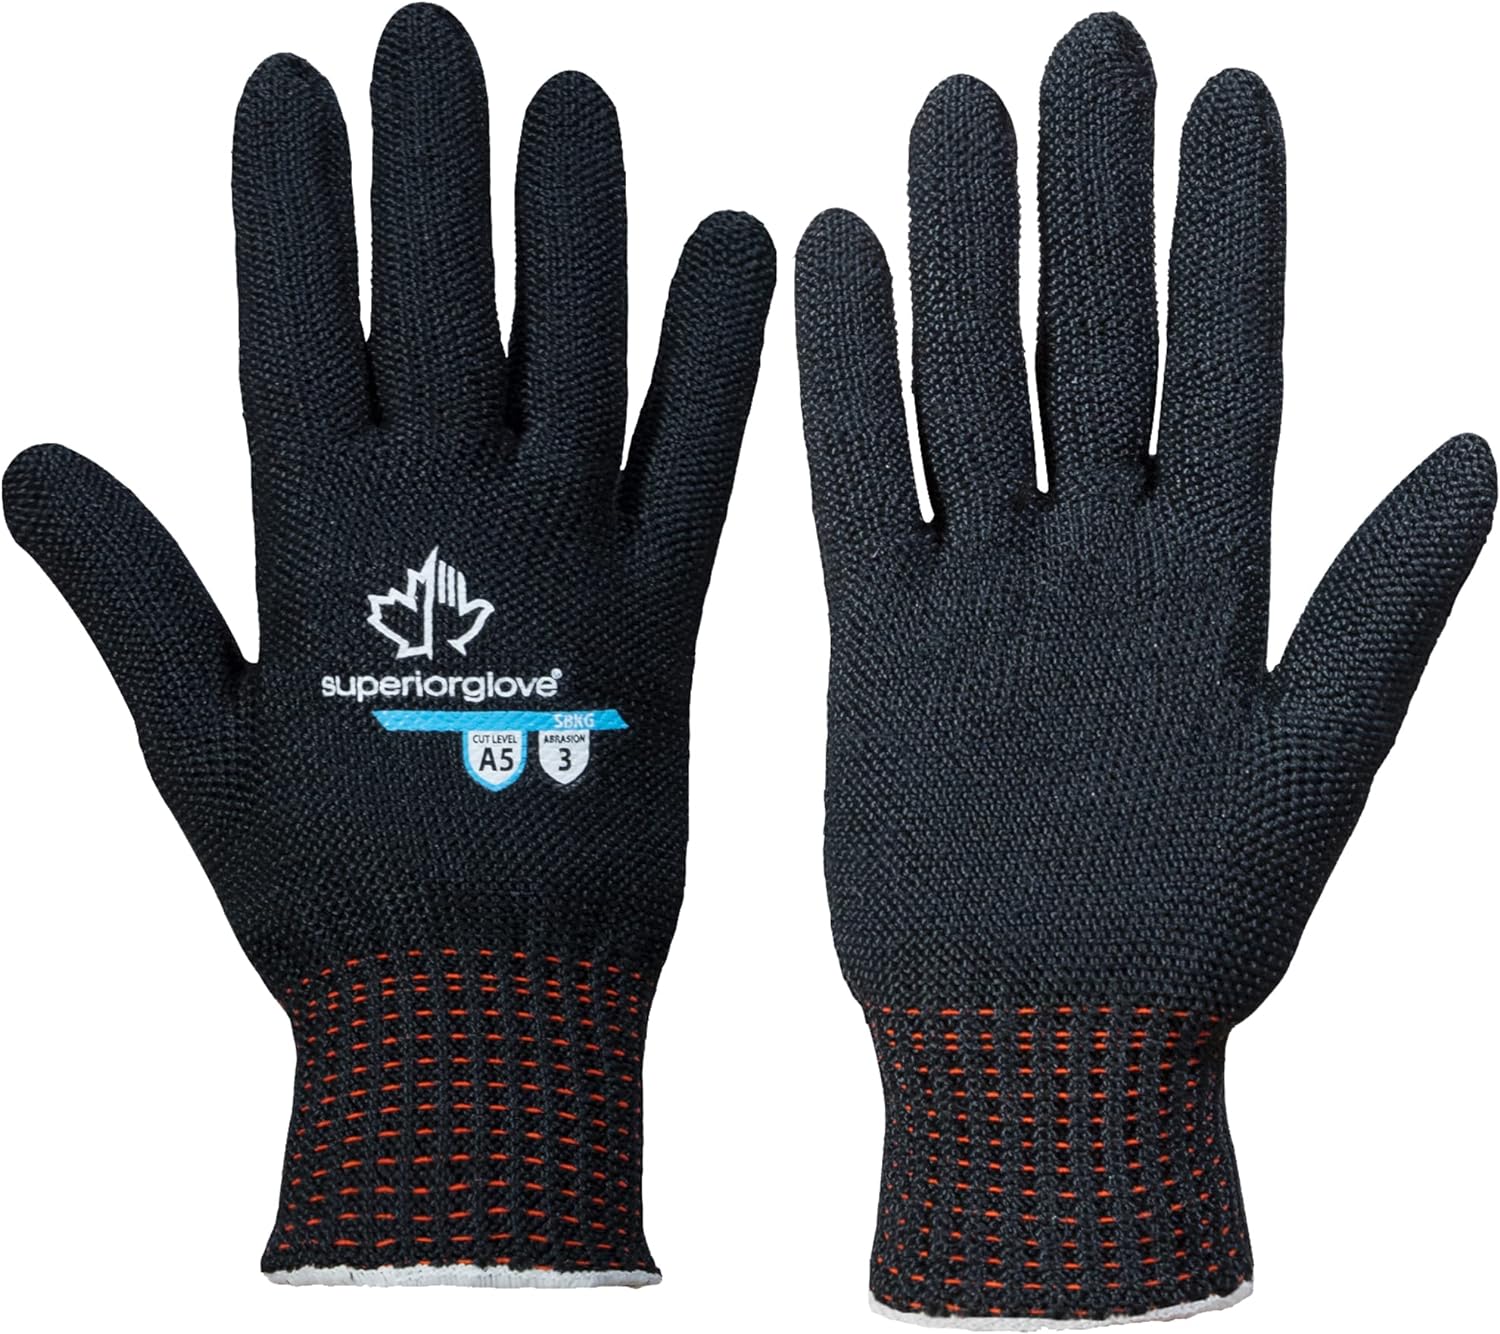 Superior Glove Works Contender Heavyweight Cut Resistant Glove with Kevlar  (1 Pair of Kitchen Heat Resistant Gloves - SBKG/L) Size Large